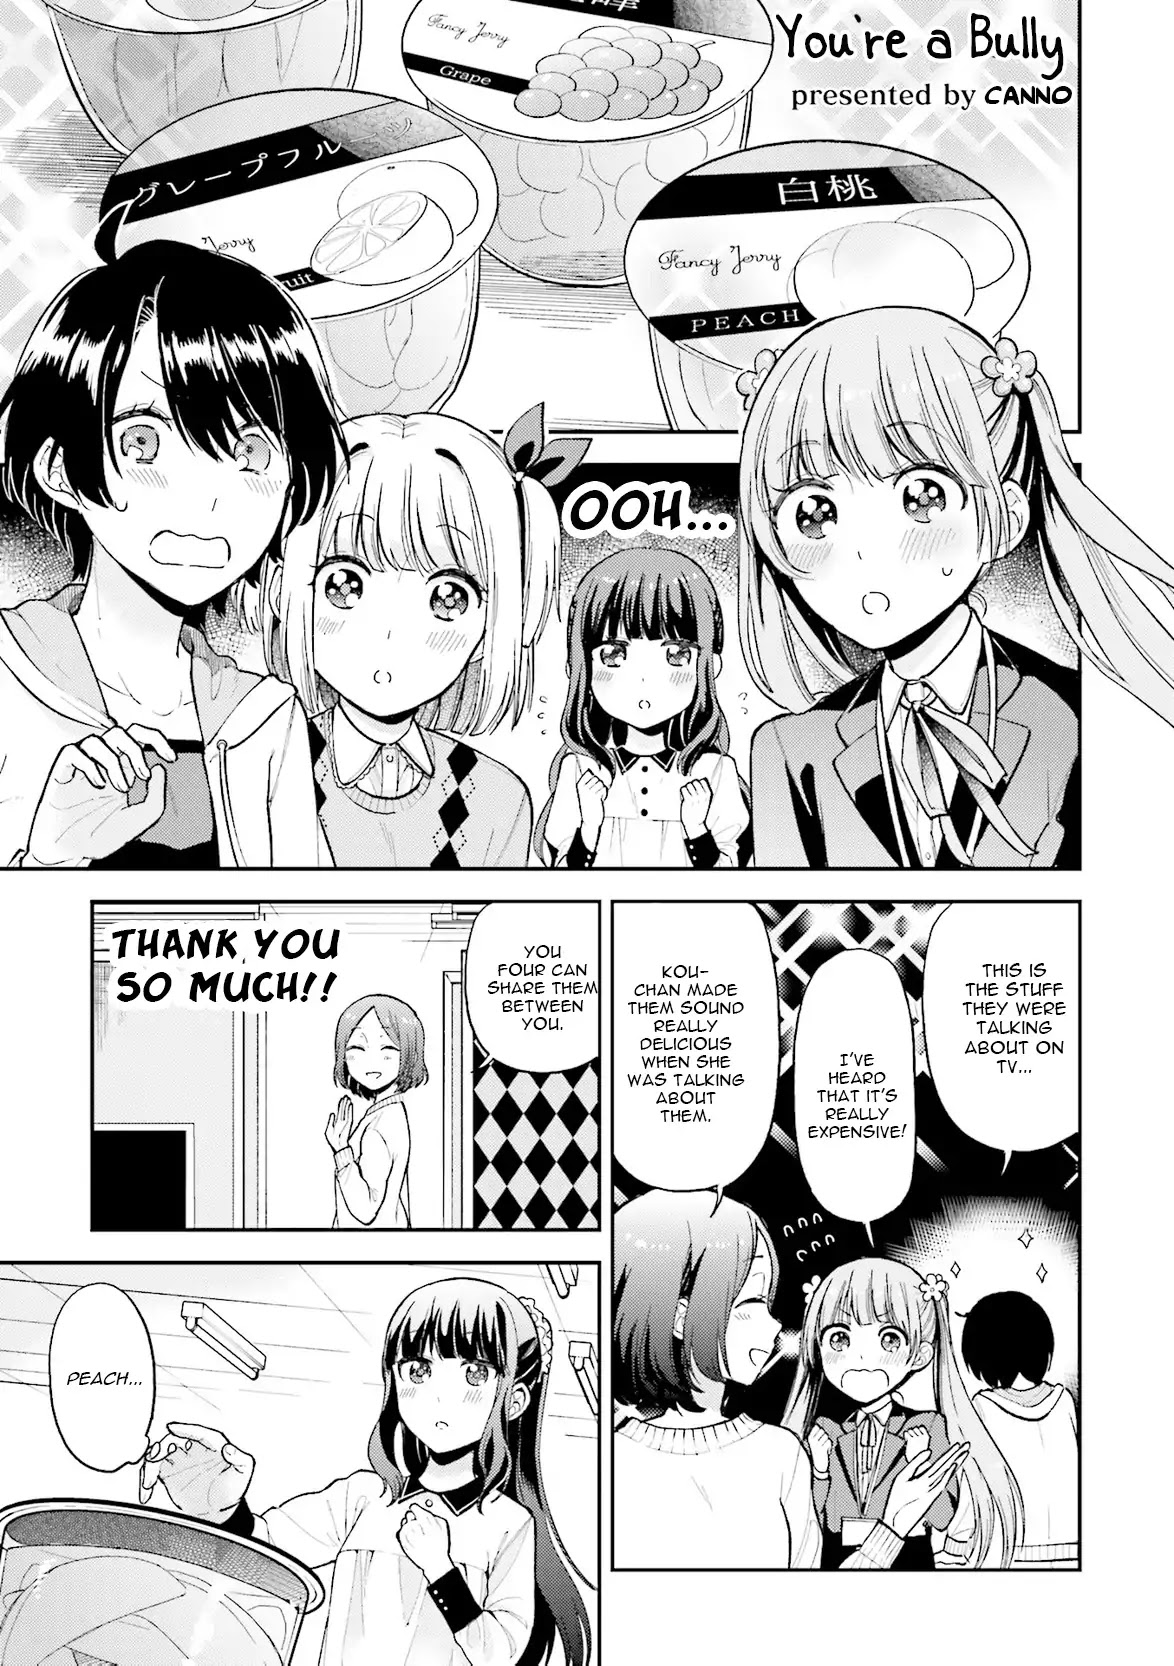 New Game! Anthology Comic - Page 1